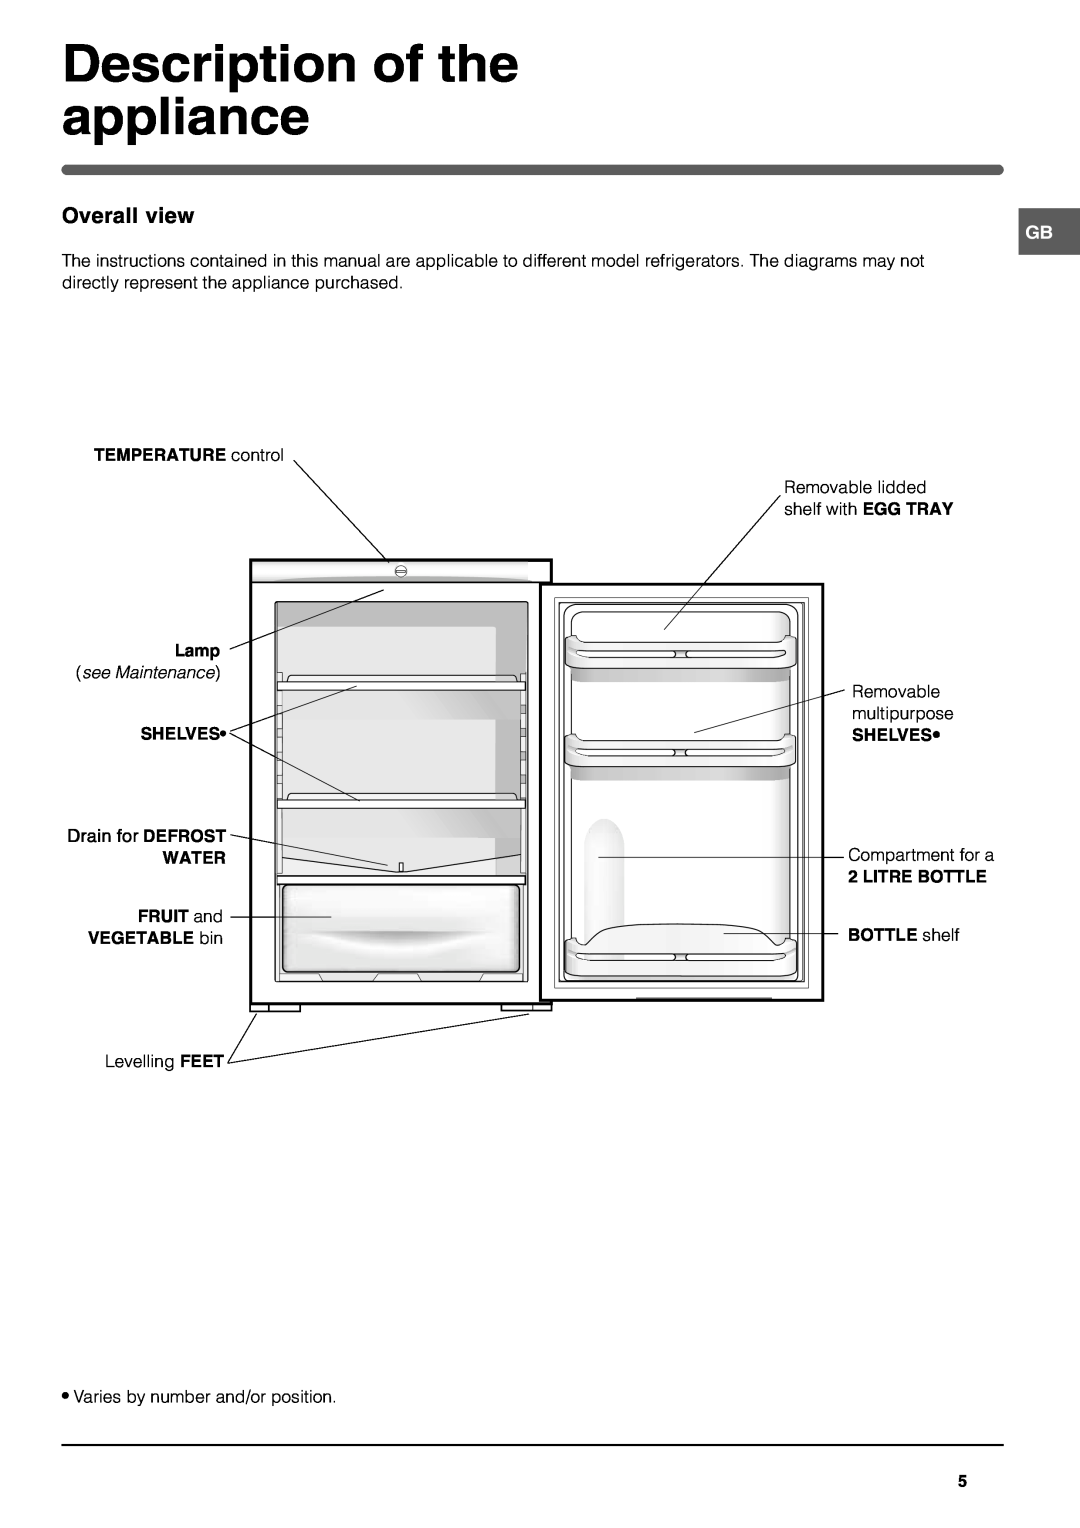 Indesit TLA1S manual Description of the appliance, Overall view, TEMPERATURE control Lamp, see Maintenance 